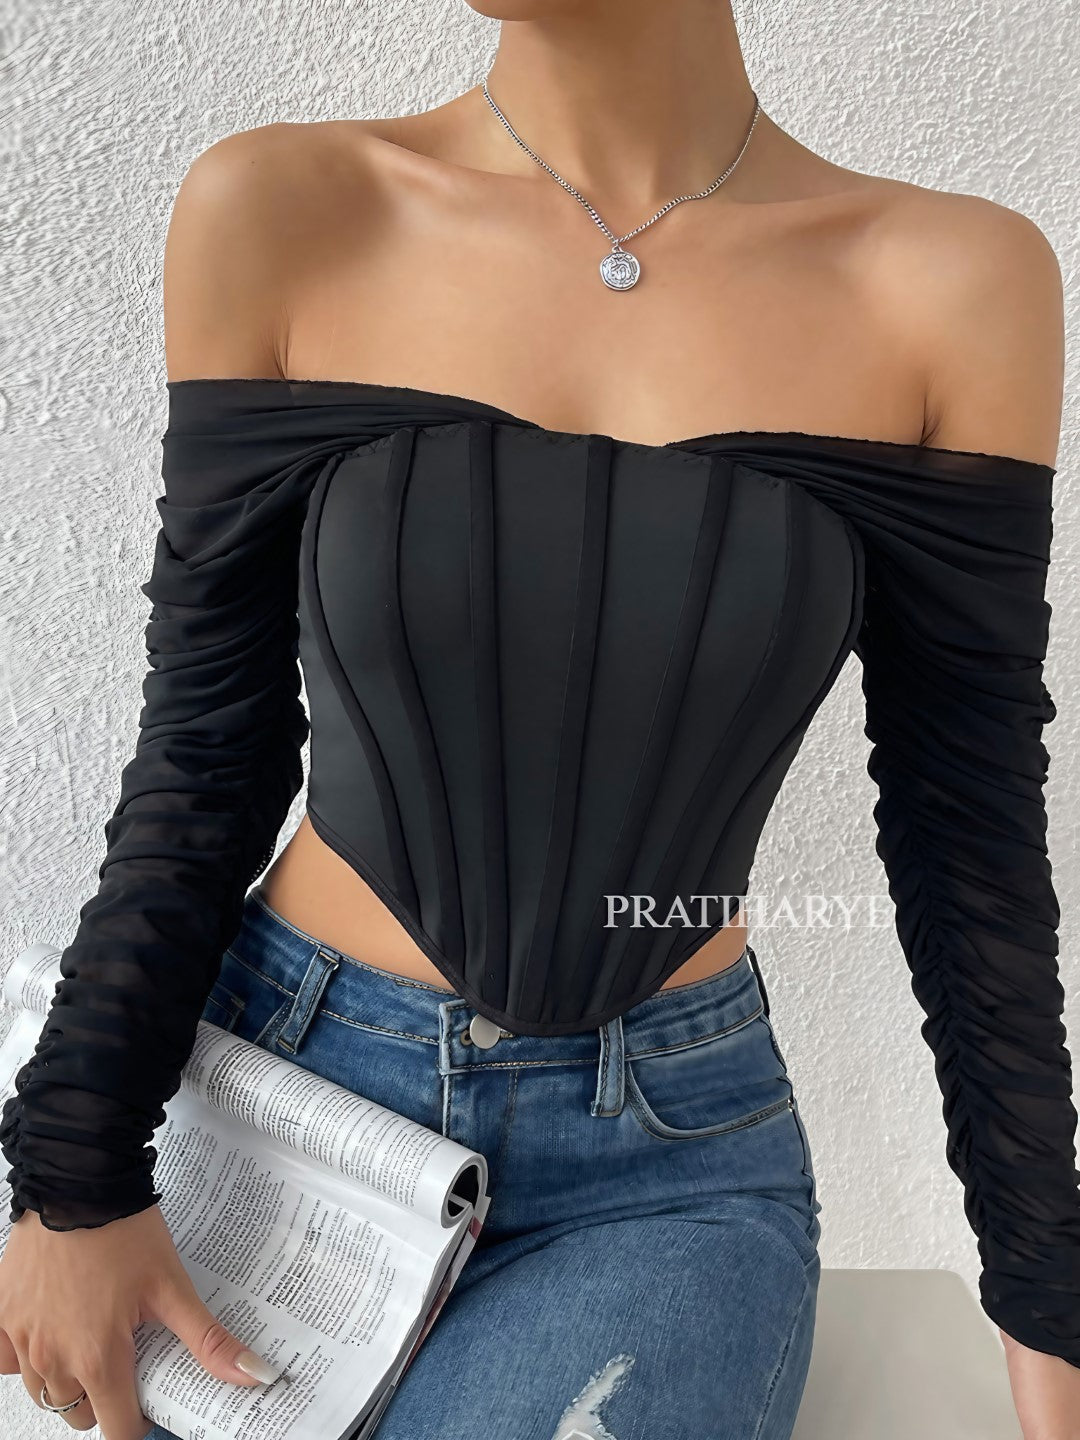 Pratiharye Corset - Corset Tops for Women - Mesh Tie Neck Halter Top Lantern Sleeve Asymmetrical Crop Cami Tops - Solid Halter Tank Top - Fishbone Wrapped Chest - Non-wired